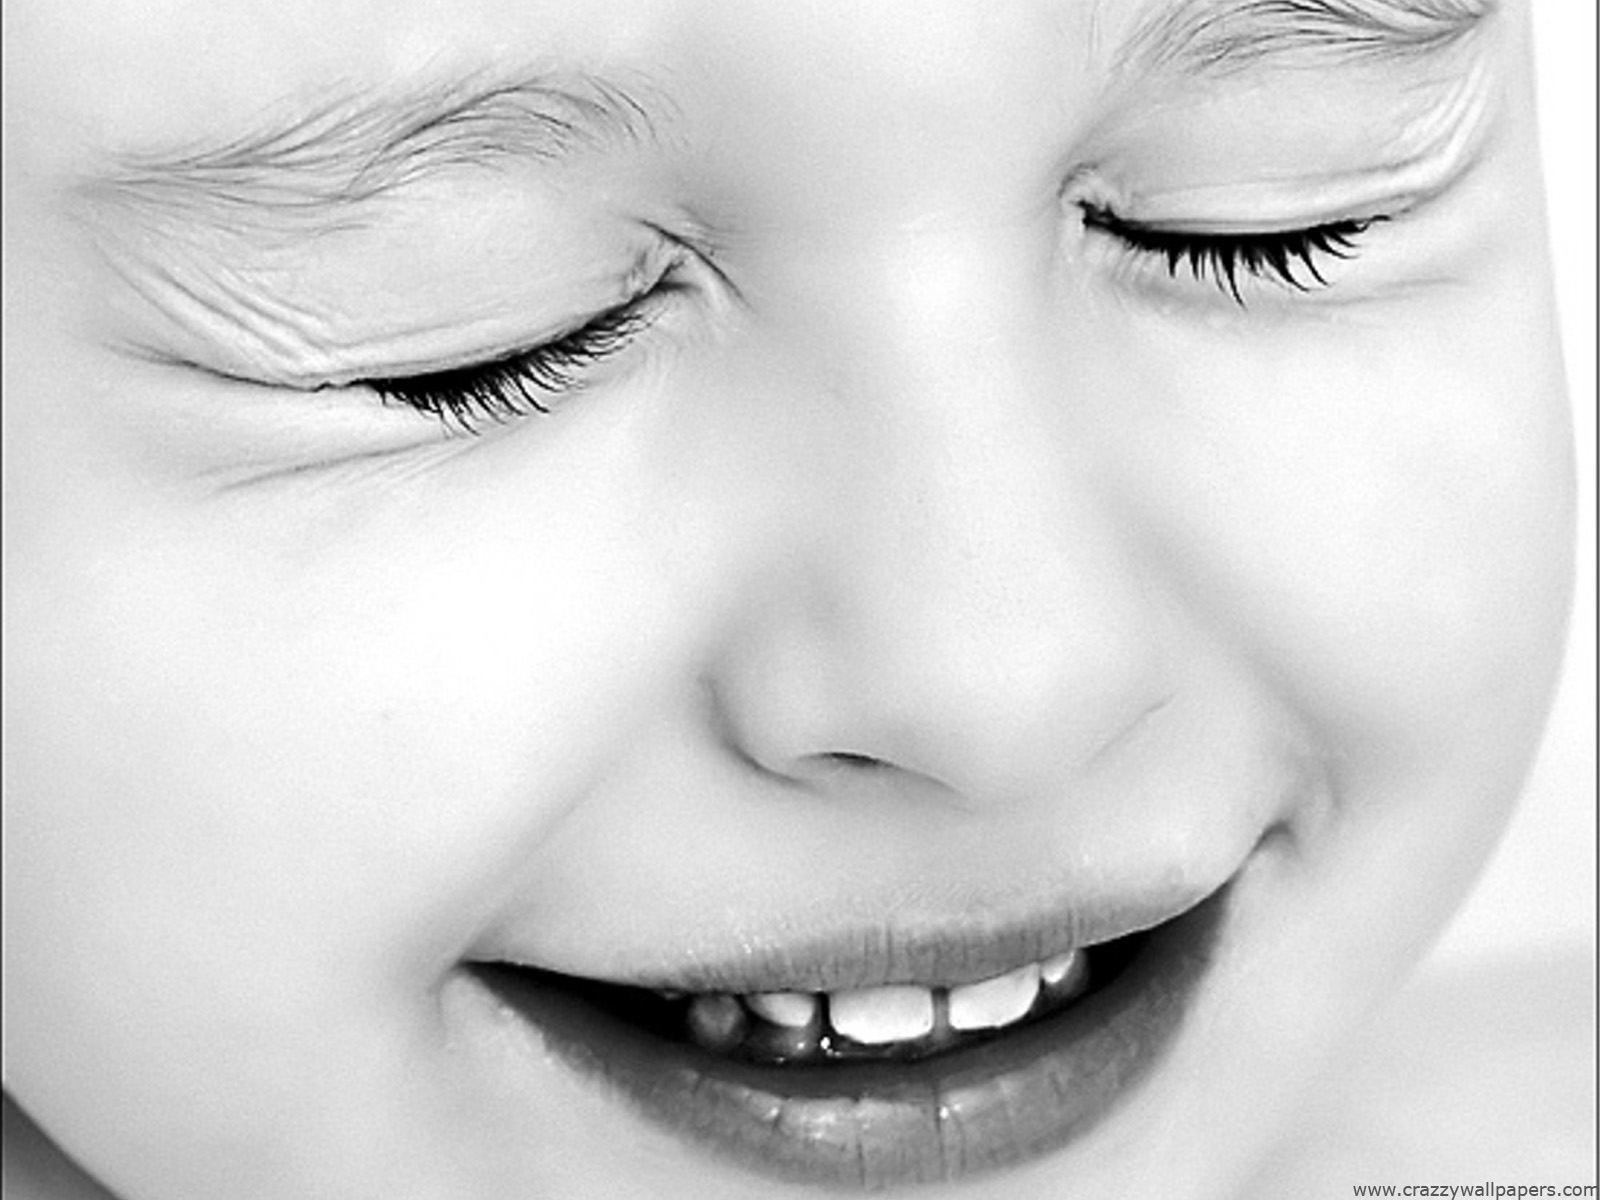 Black & White Baby , HD Wallpaper & Backgrounds